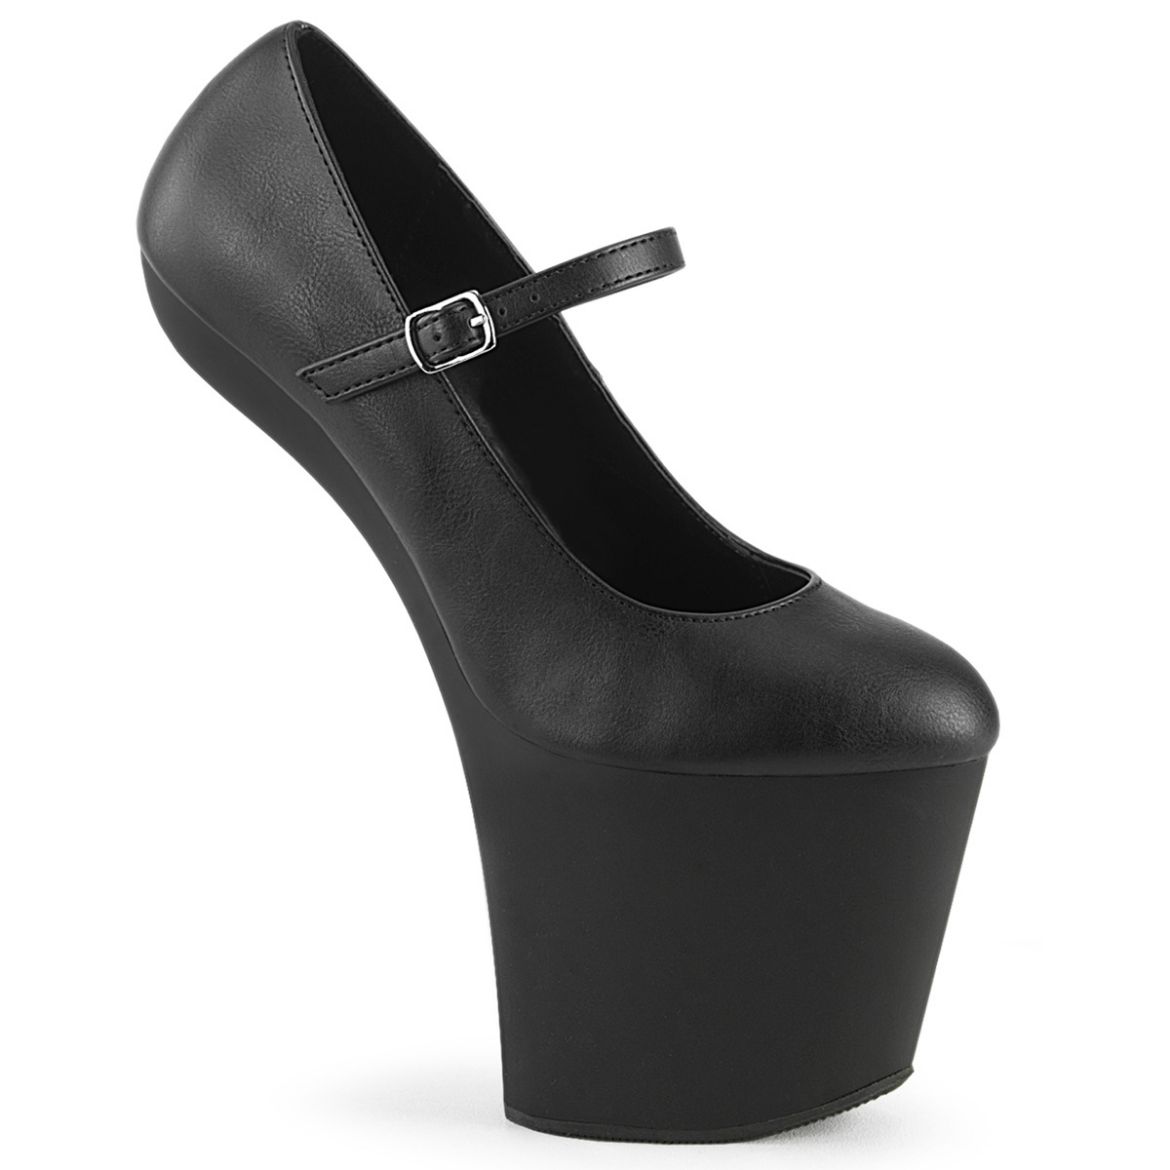 Product image of Pleaser CRAZE-880 Blk Faux Leather/Blk Matte 8 Inch Heelless 3 Inch PF Mary Jane Pump